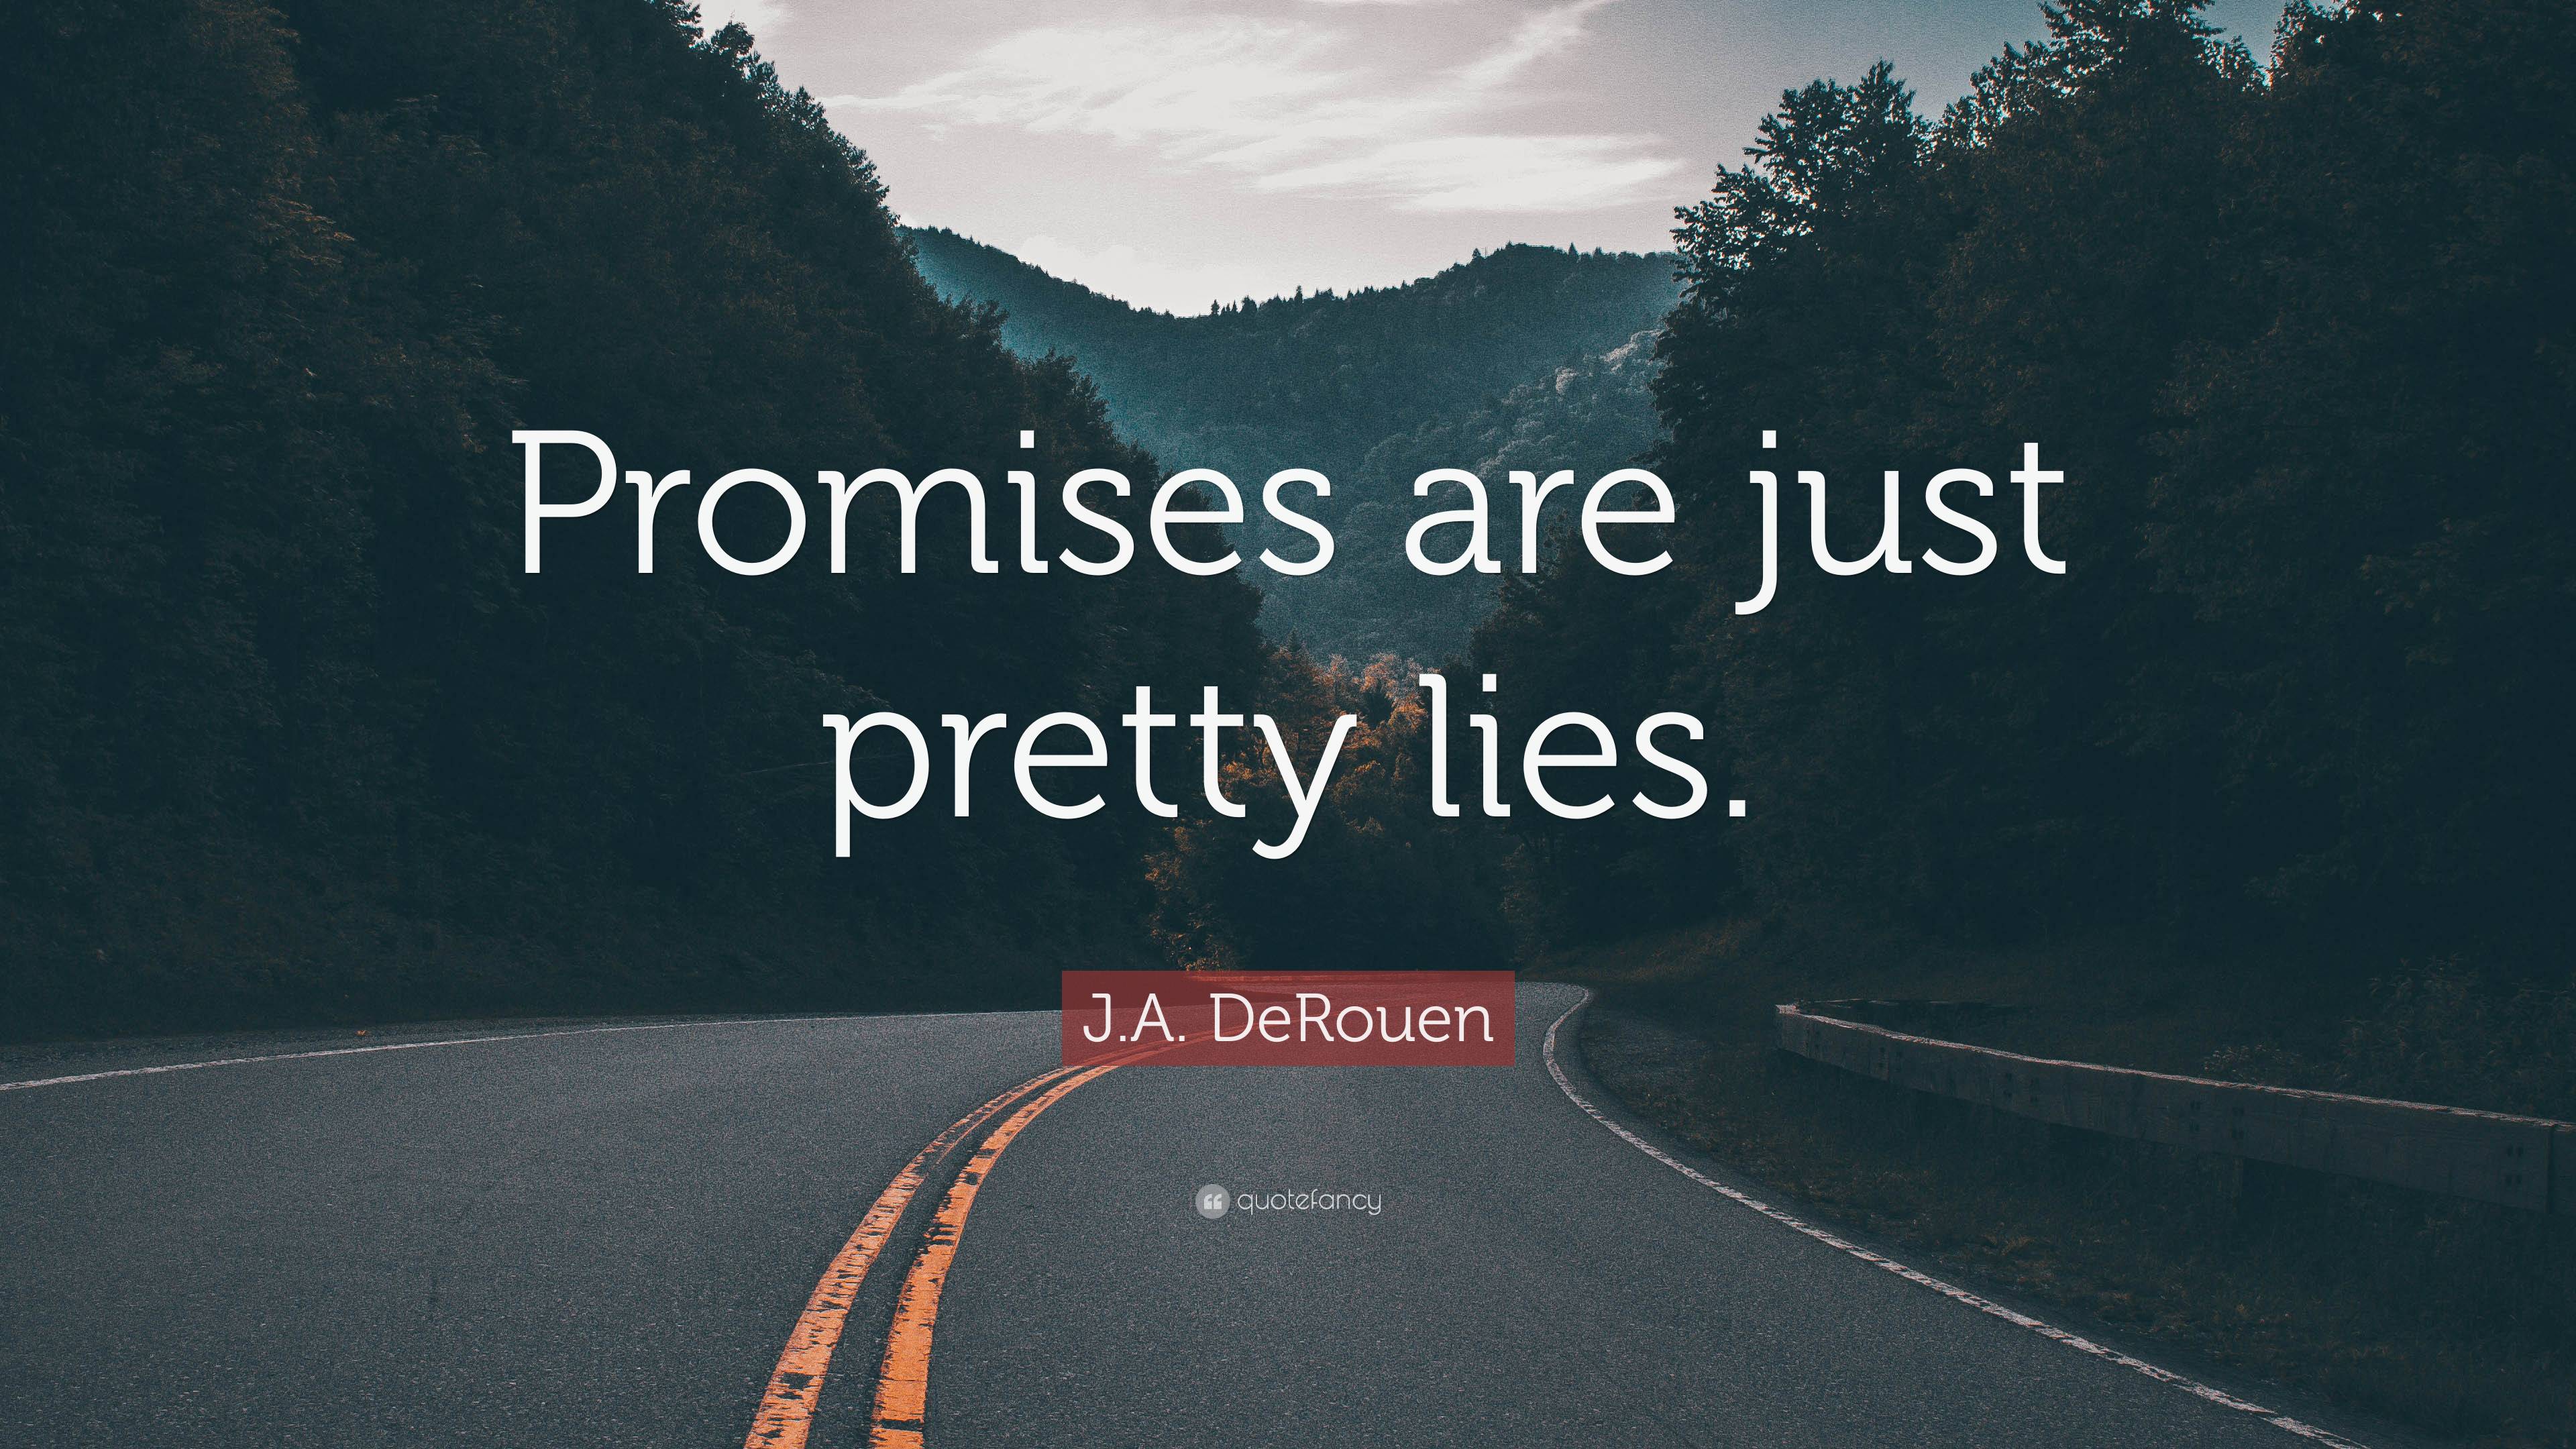 quotes about broken promises and lies